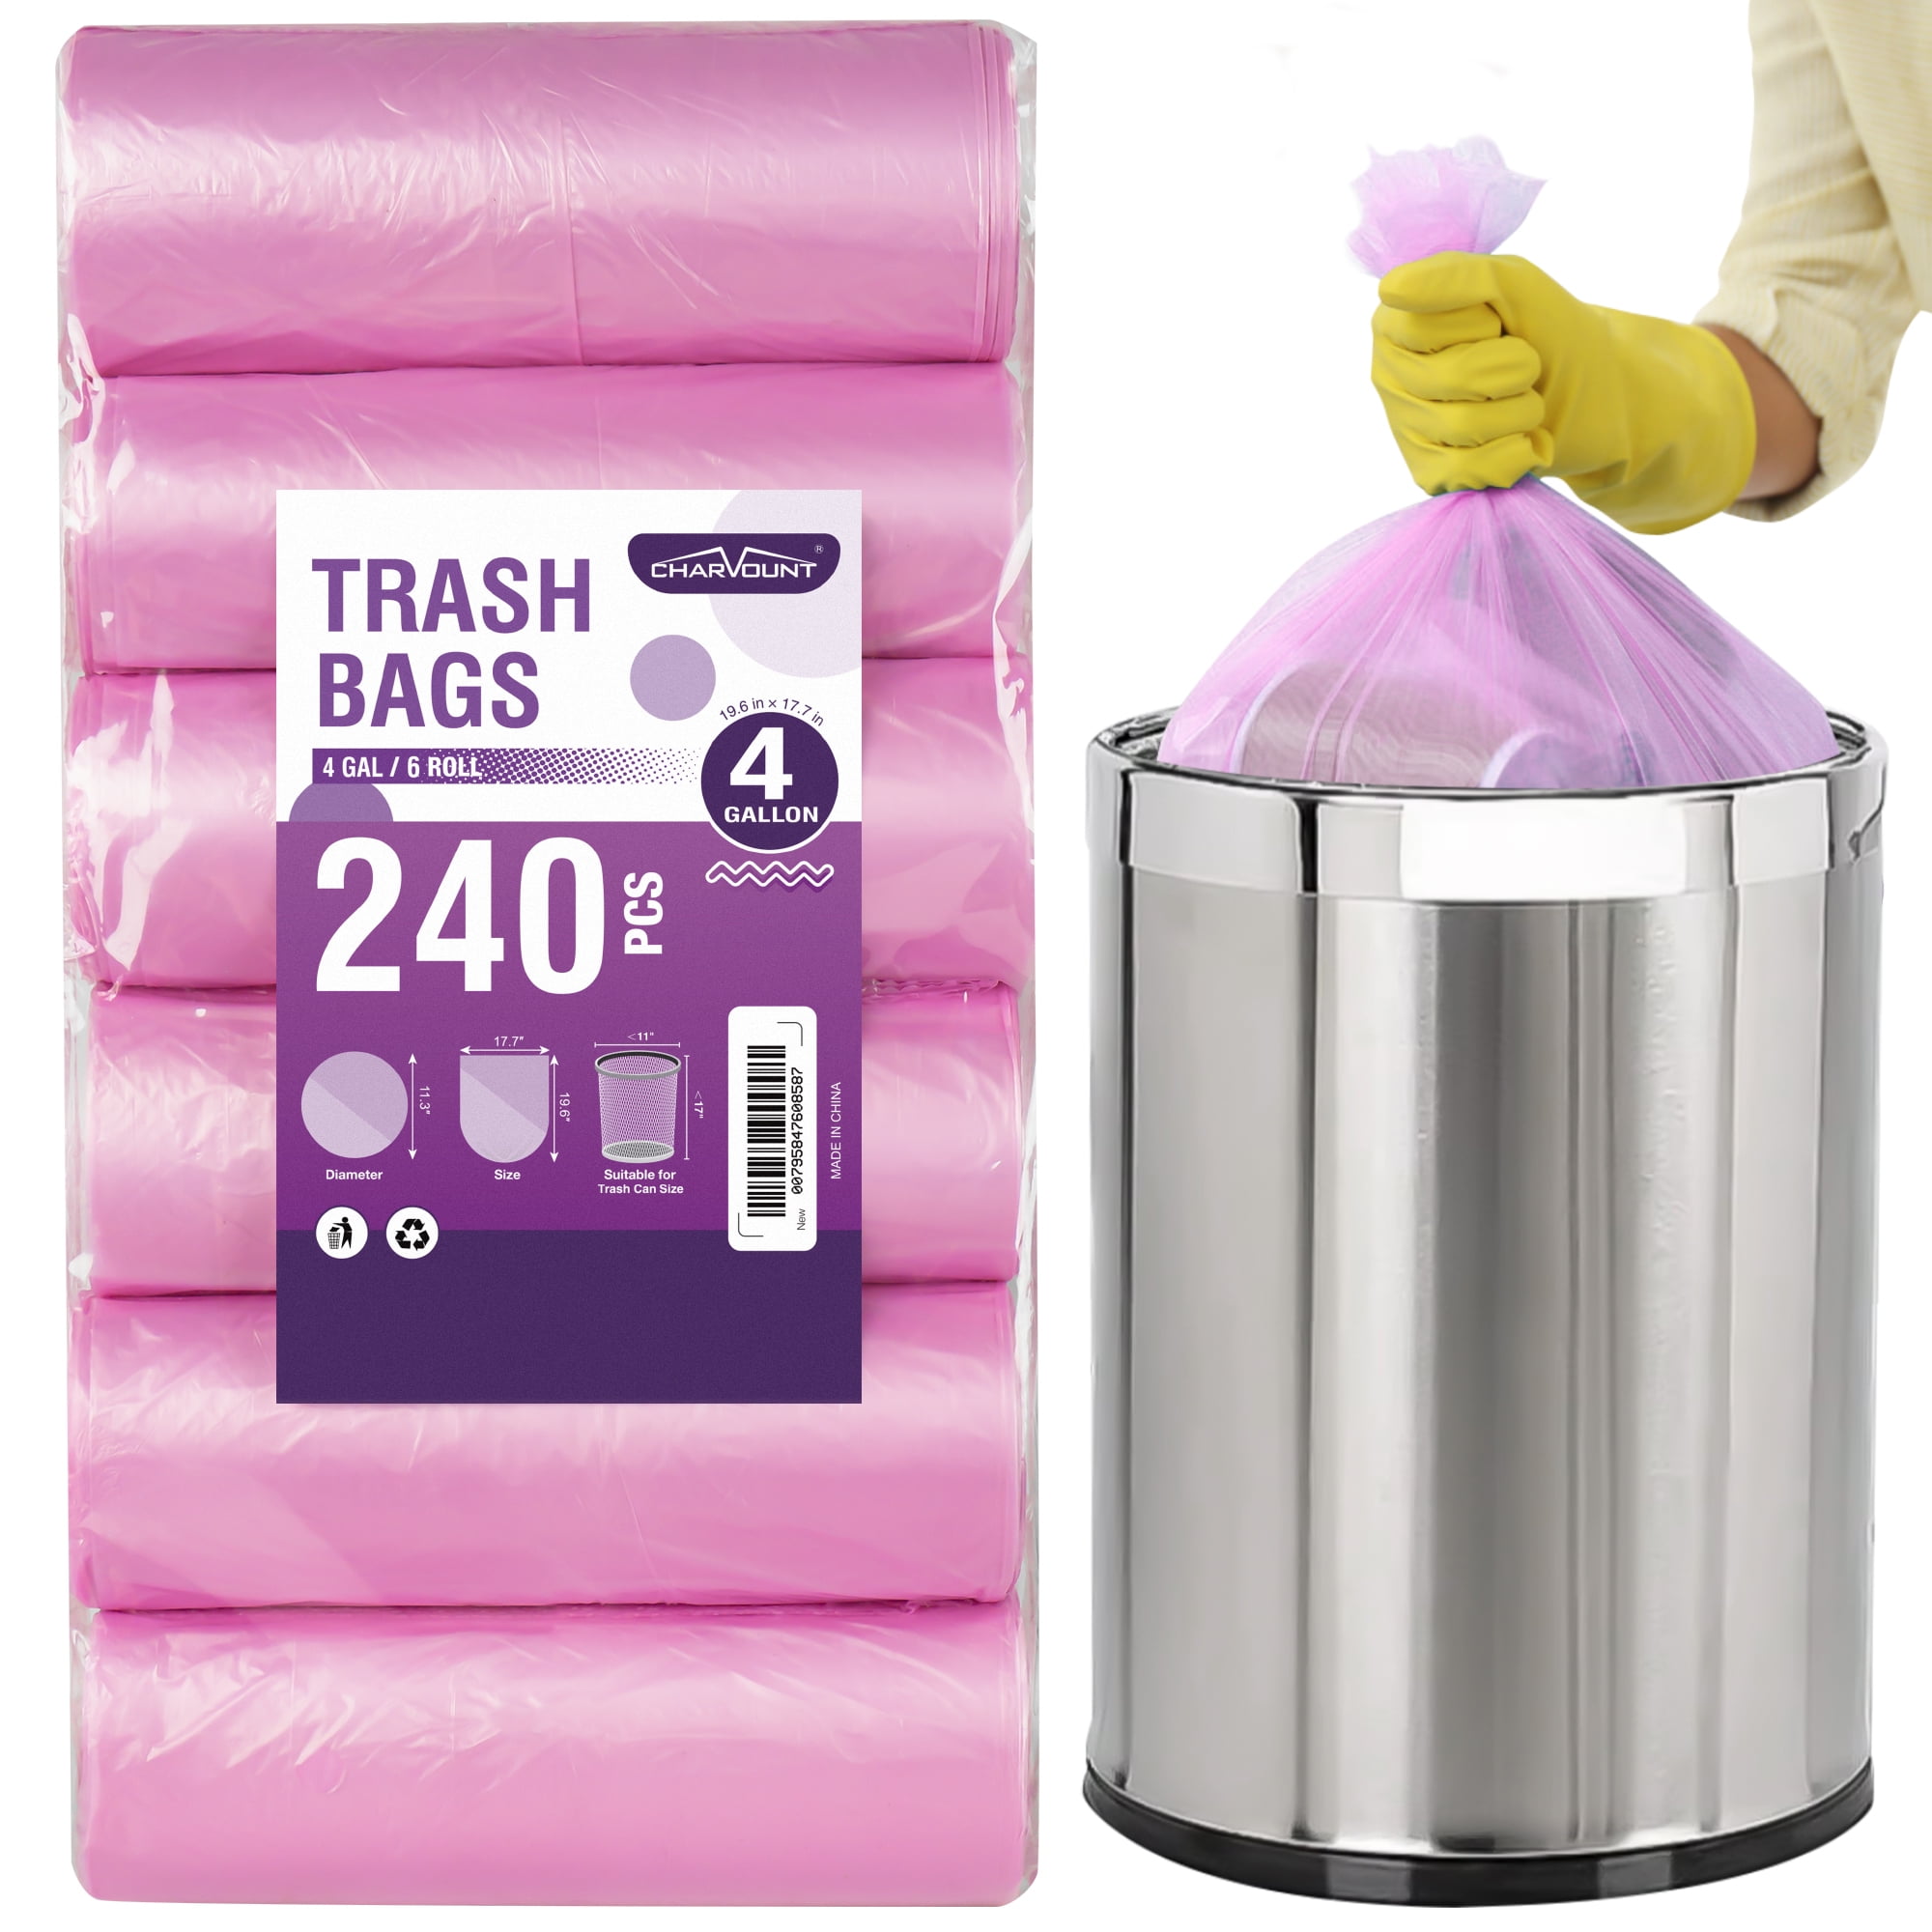 Glad Small Twist-Tie White Trash Bags, Fresh Clean Scent with Febreze  Freshness (4 gal., 156 ct.)